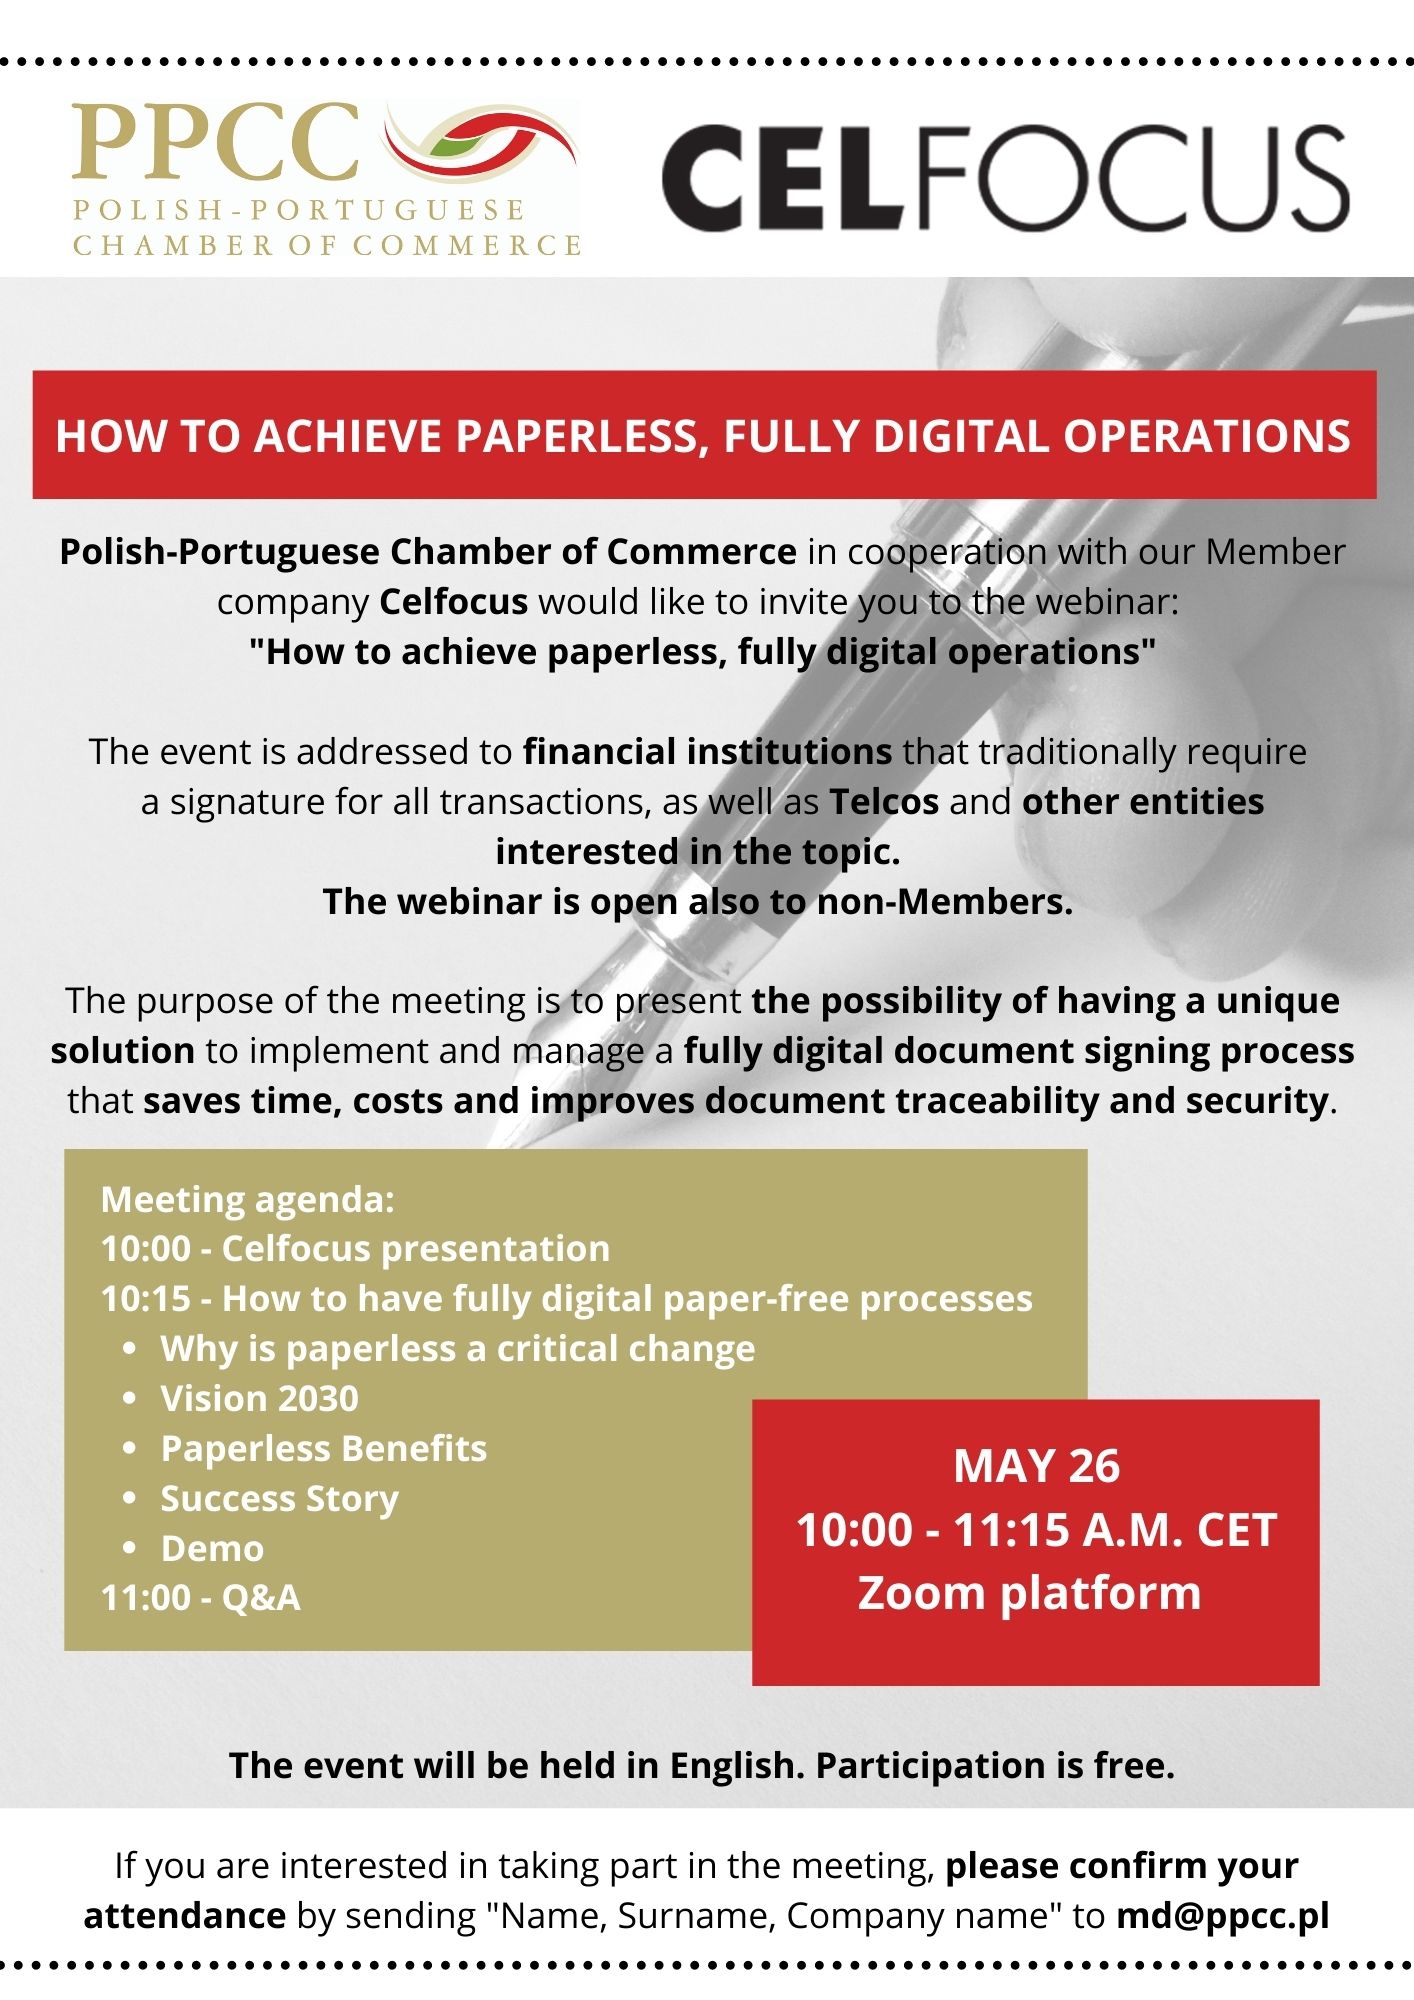 PPCC & Celfocus webinar: "How to achieve paperless, fully digital operations", 26 May 2021, 10 a.m.